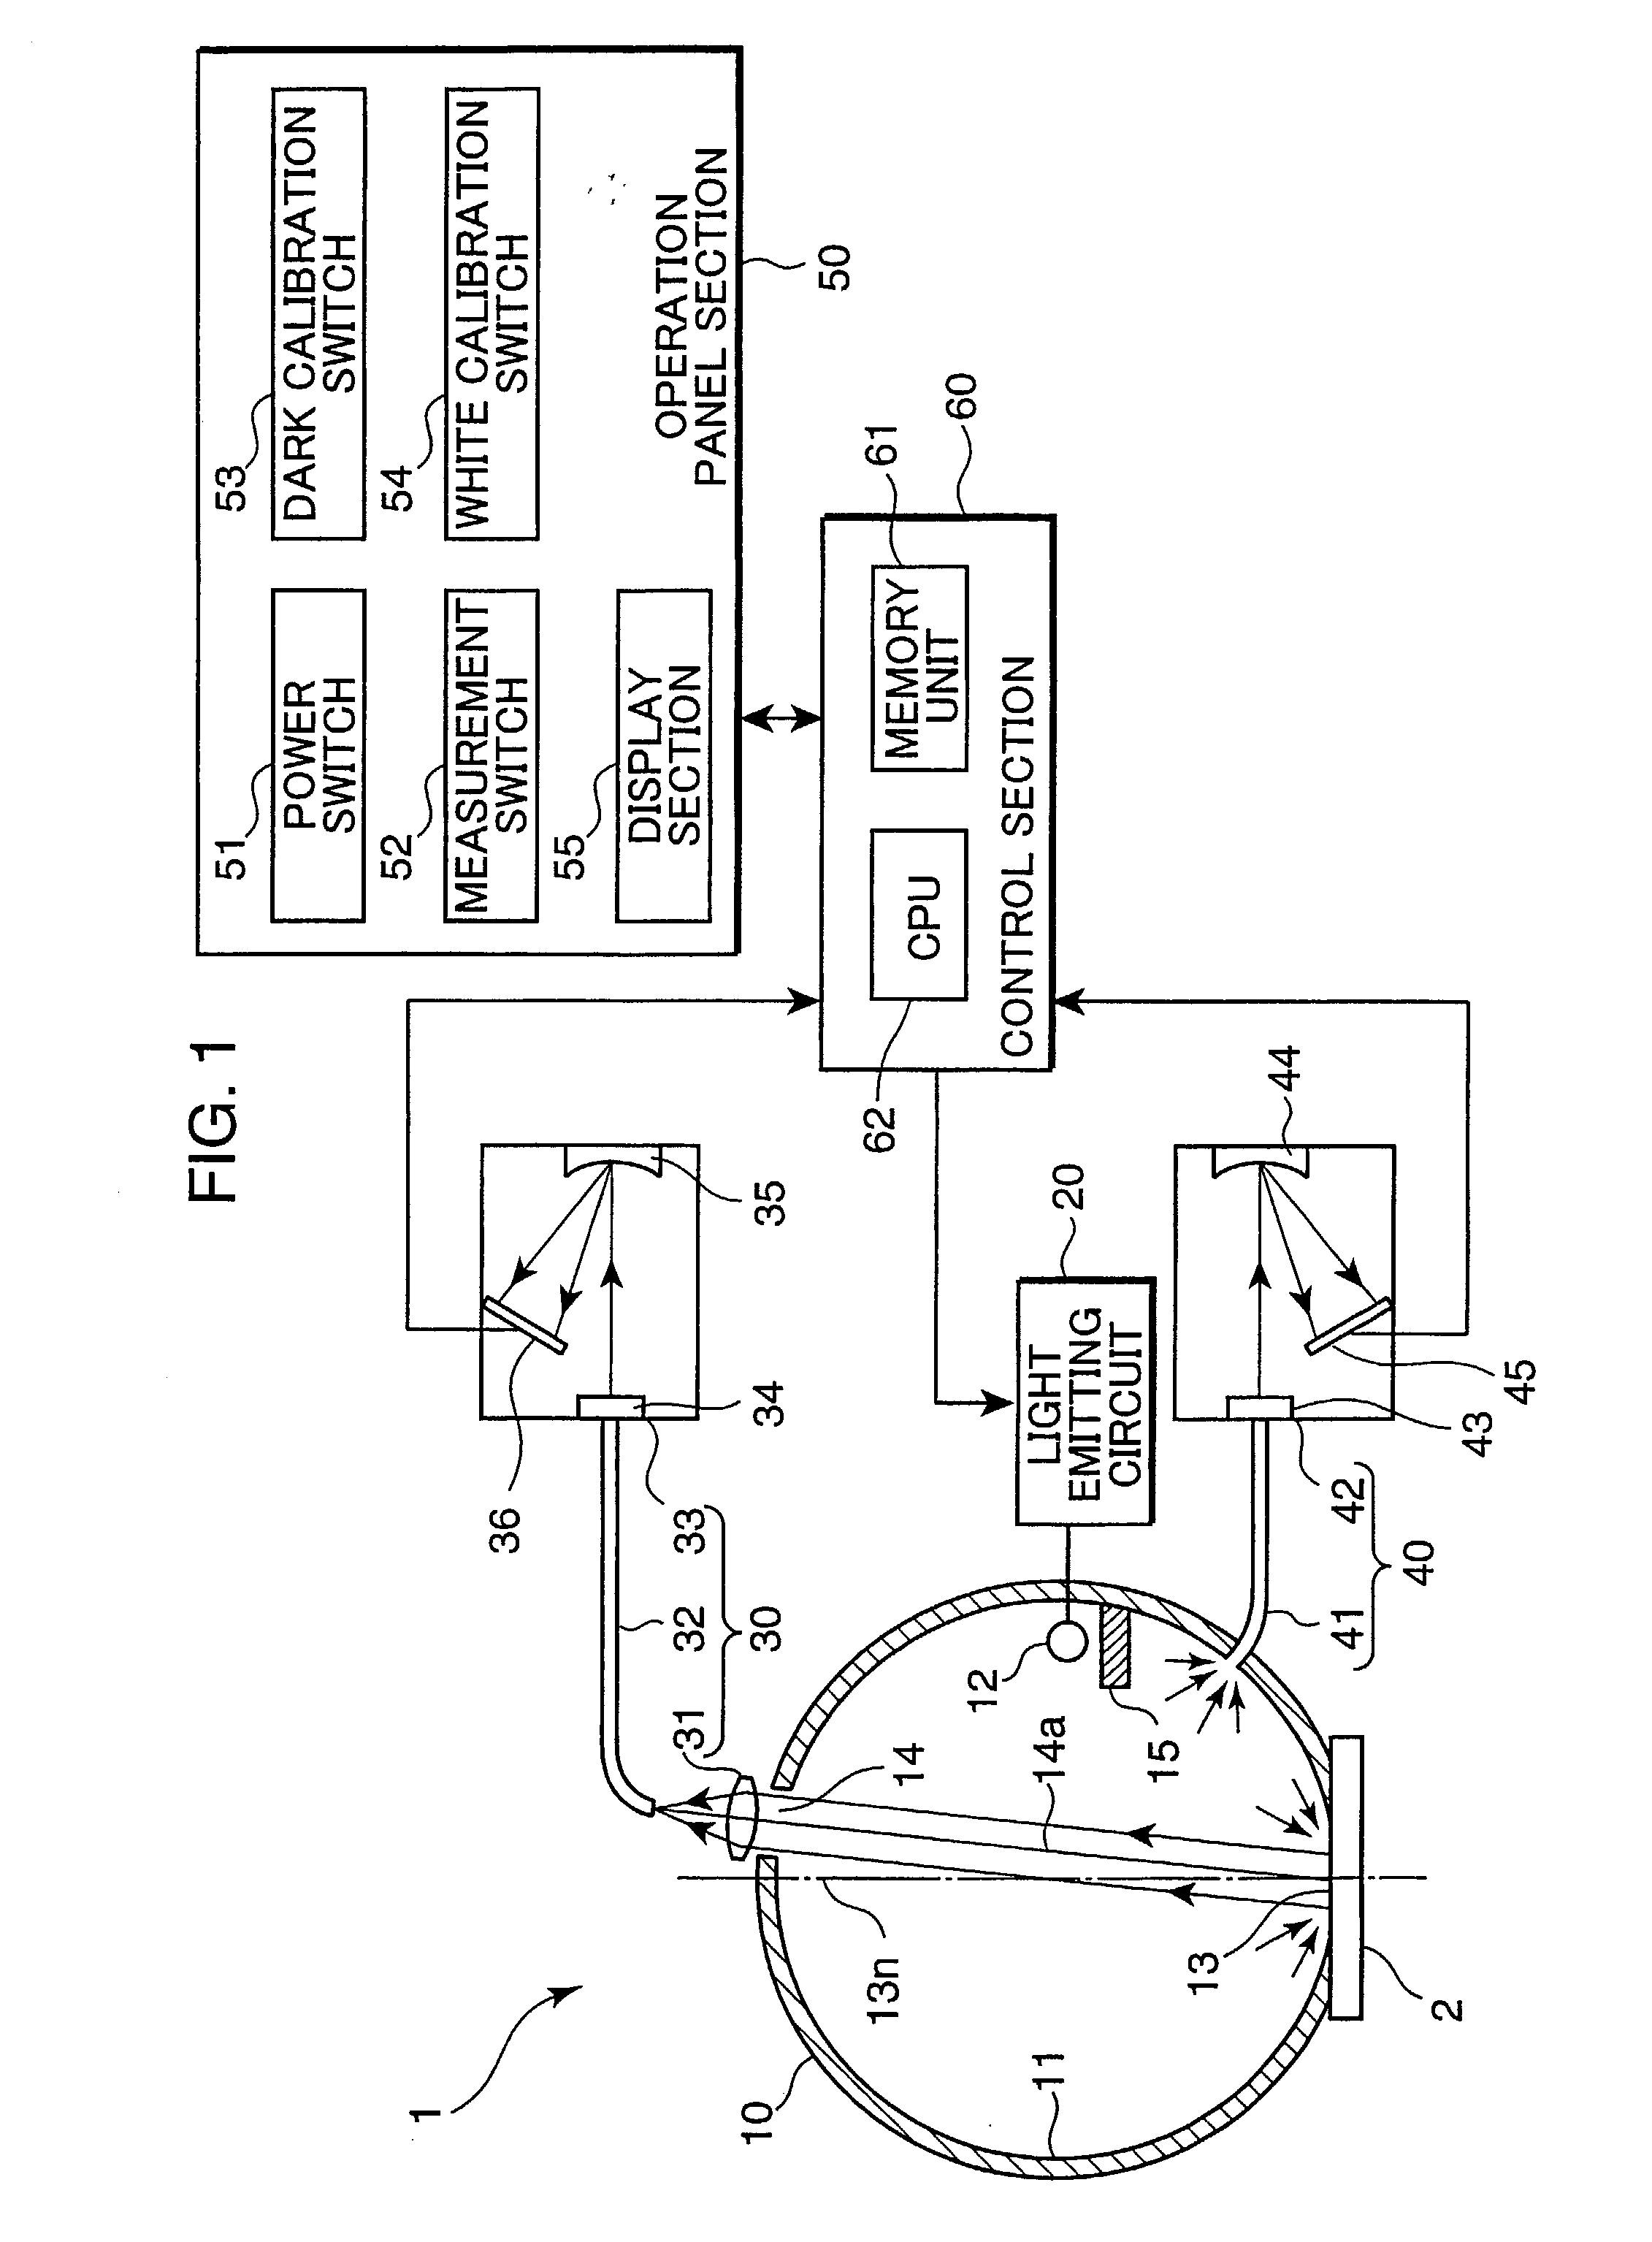 Spectral characteristic measuring apparatus and method for correcting wavelength shift of spectral sensitivity in the apparatus